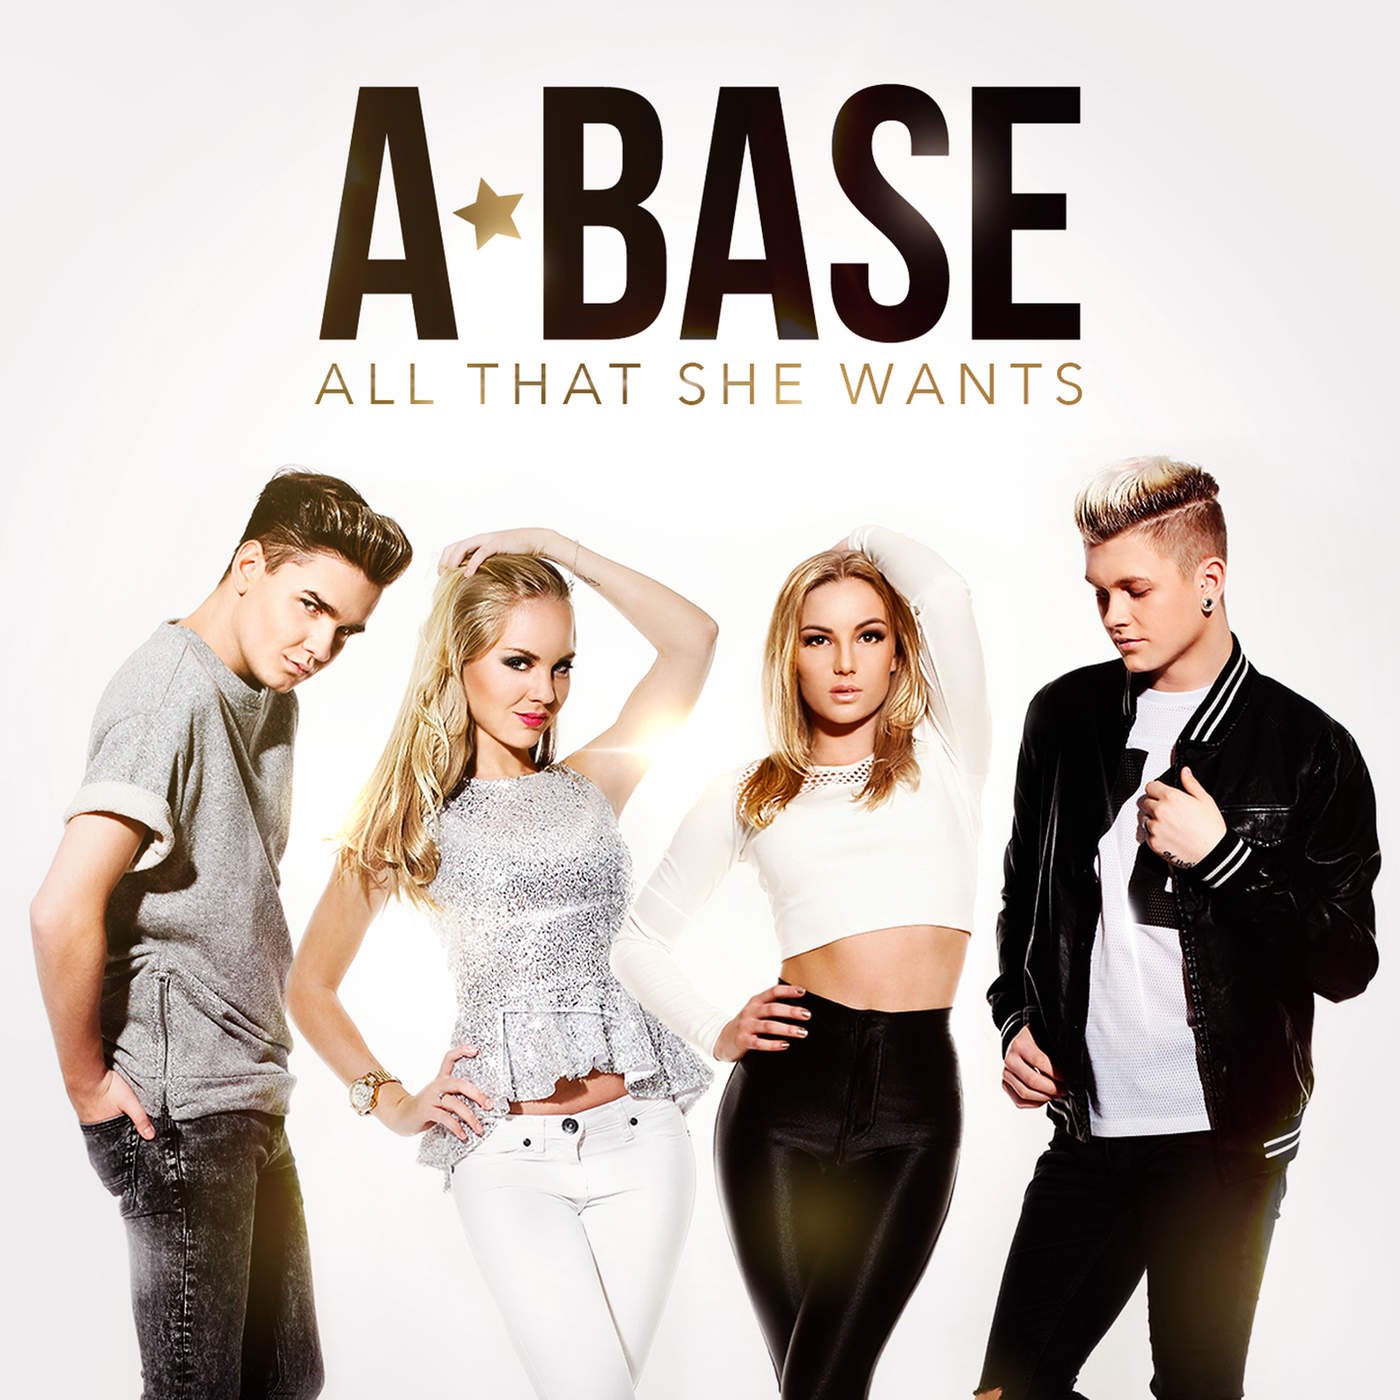 Mandee feat ace of base. Ace of Base all that she wants альбом. Ace of Base all that she wants обложка. Ace of Base Ace of Base - all that she wants. Ice of Base песня all that she wants.